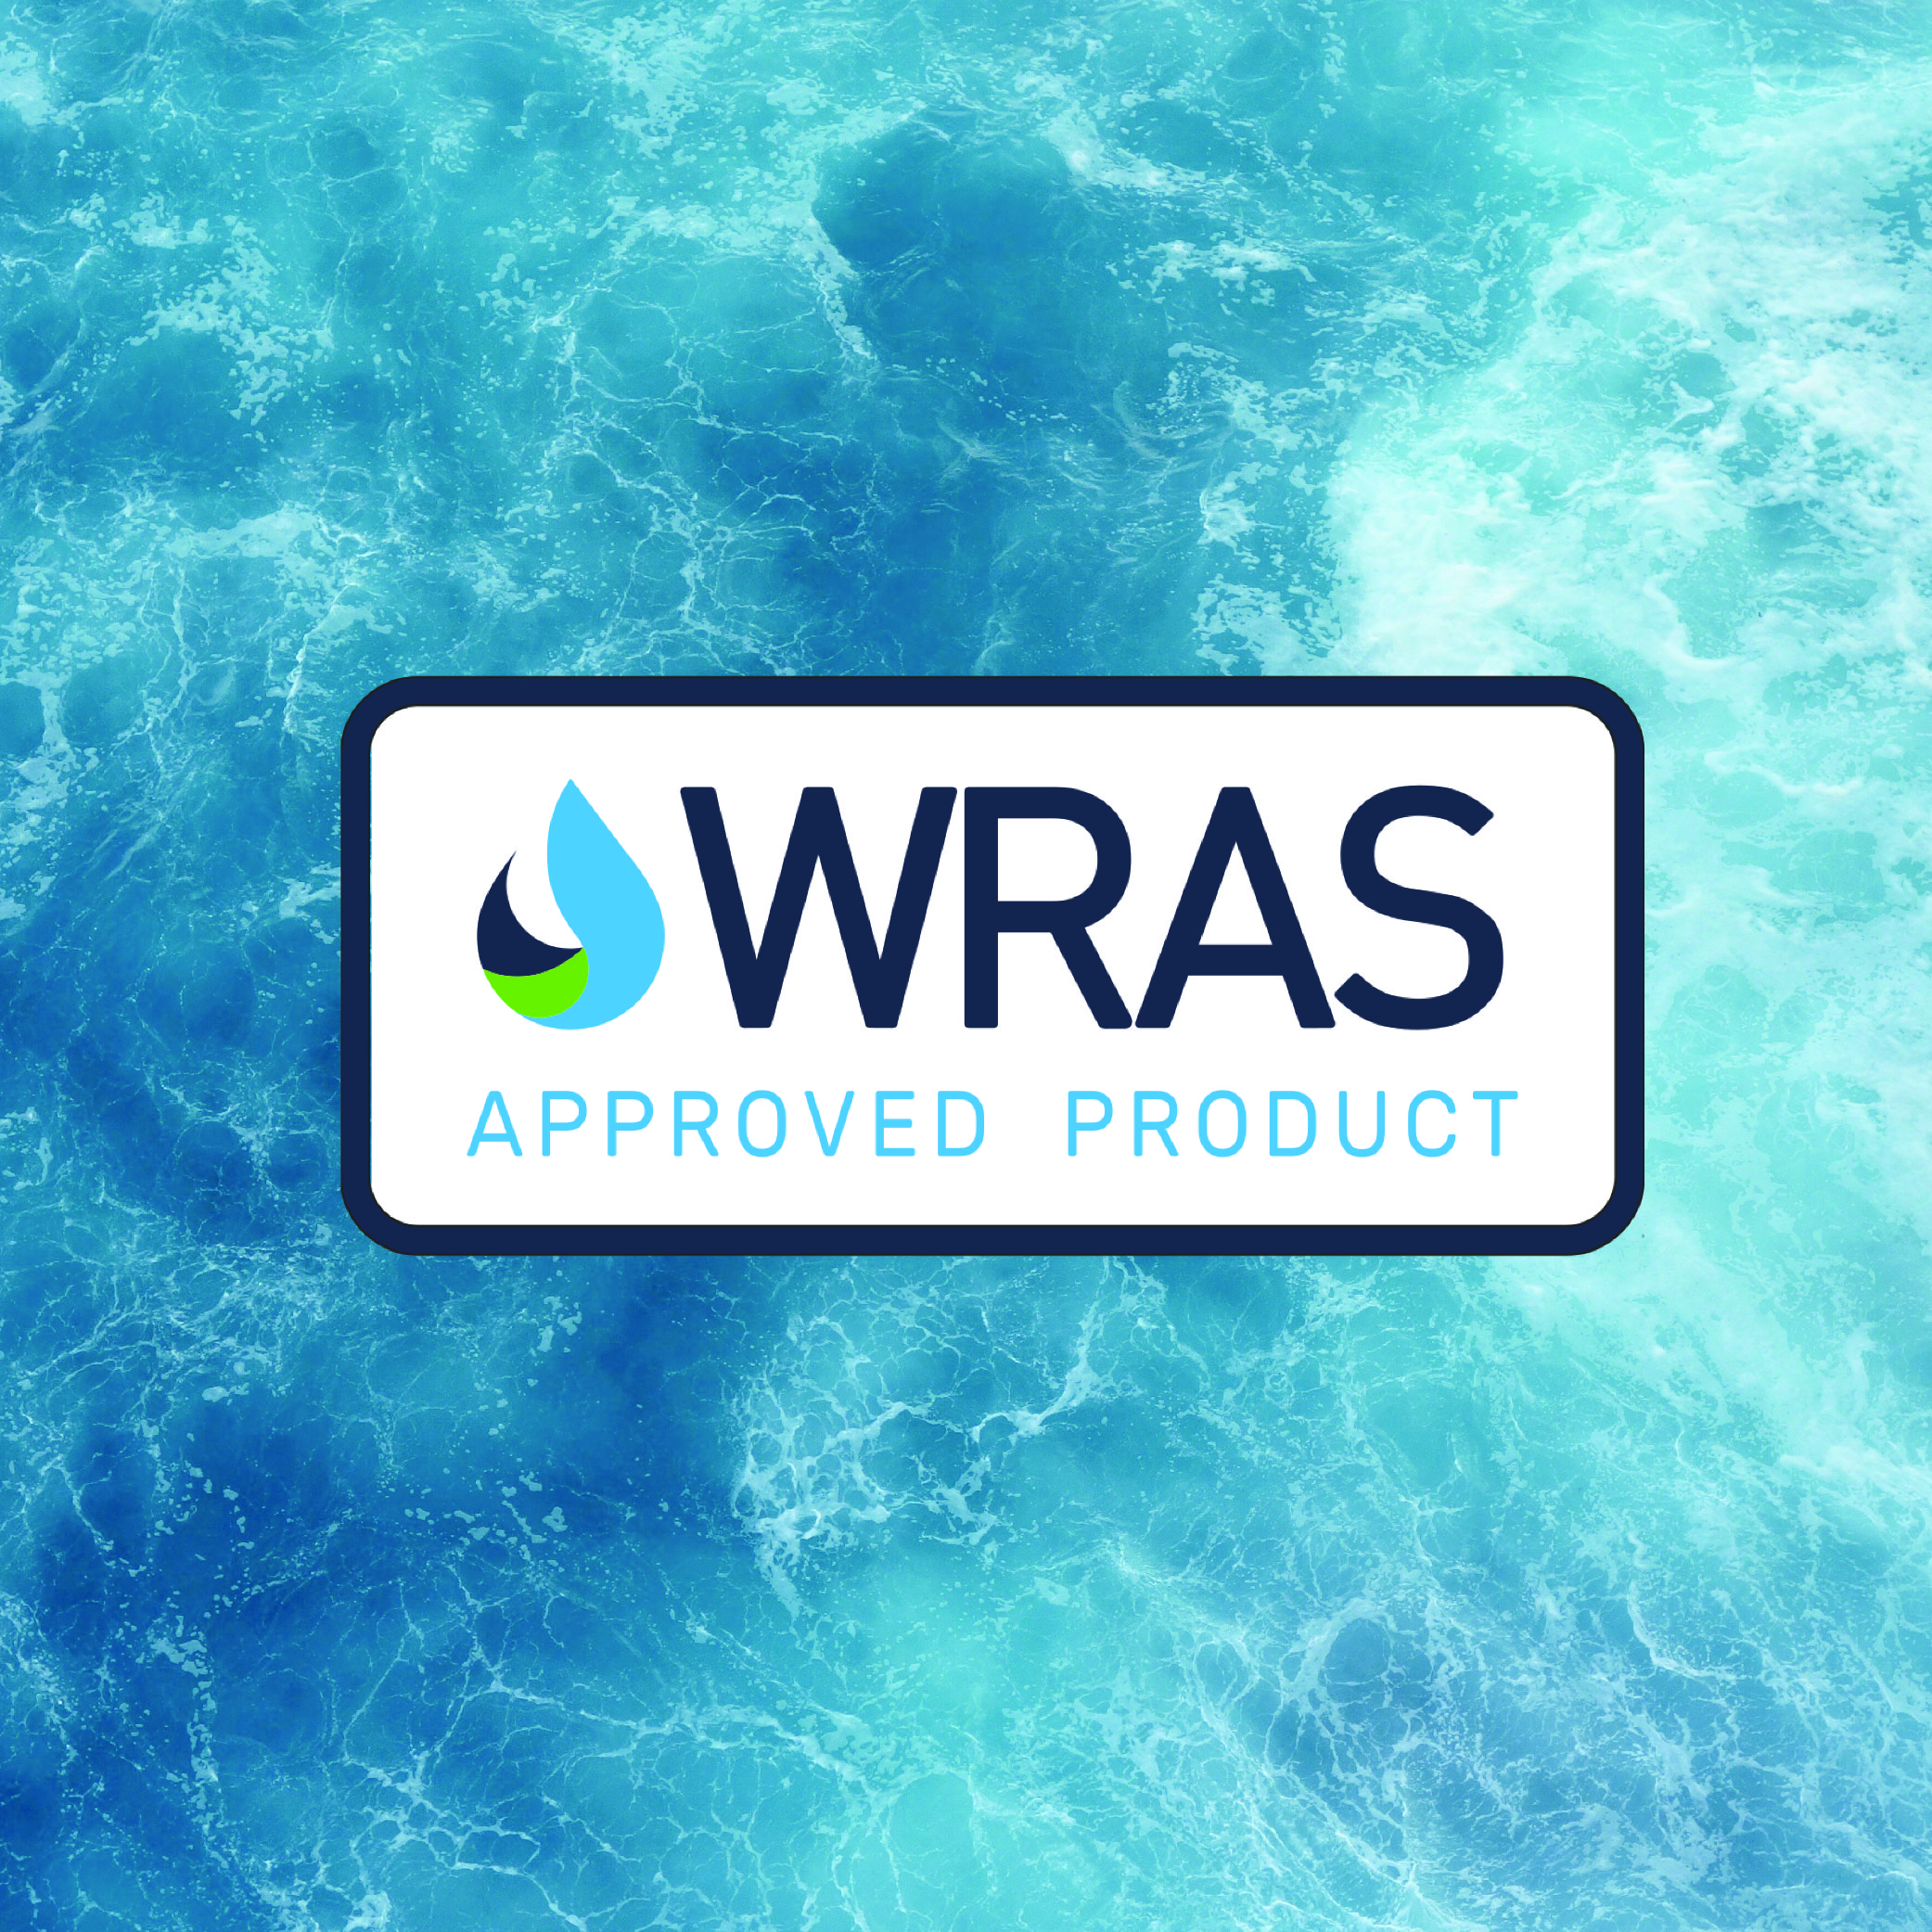 Benefits of WRAS approval